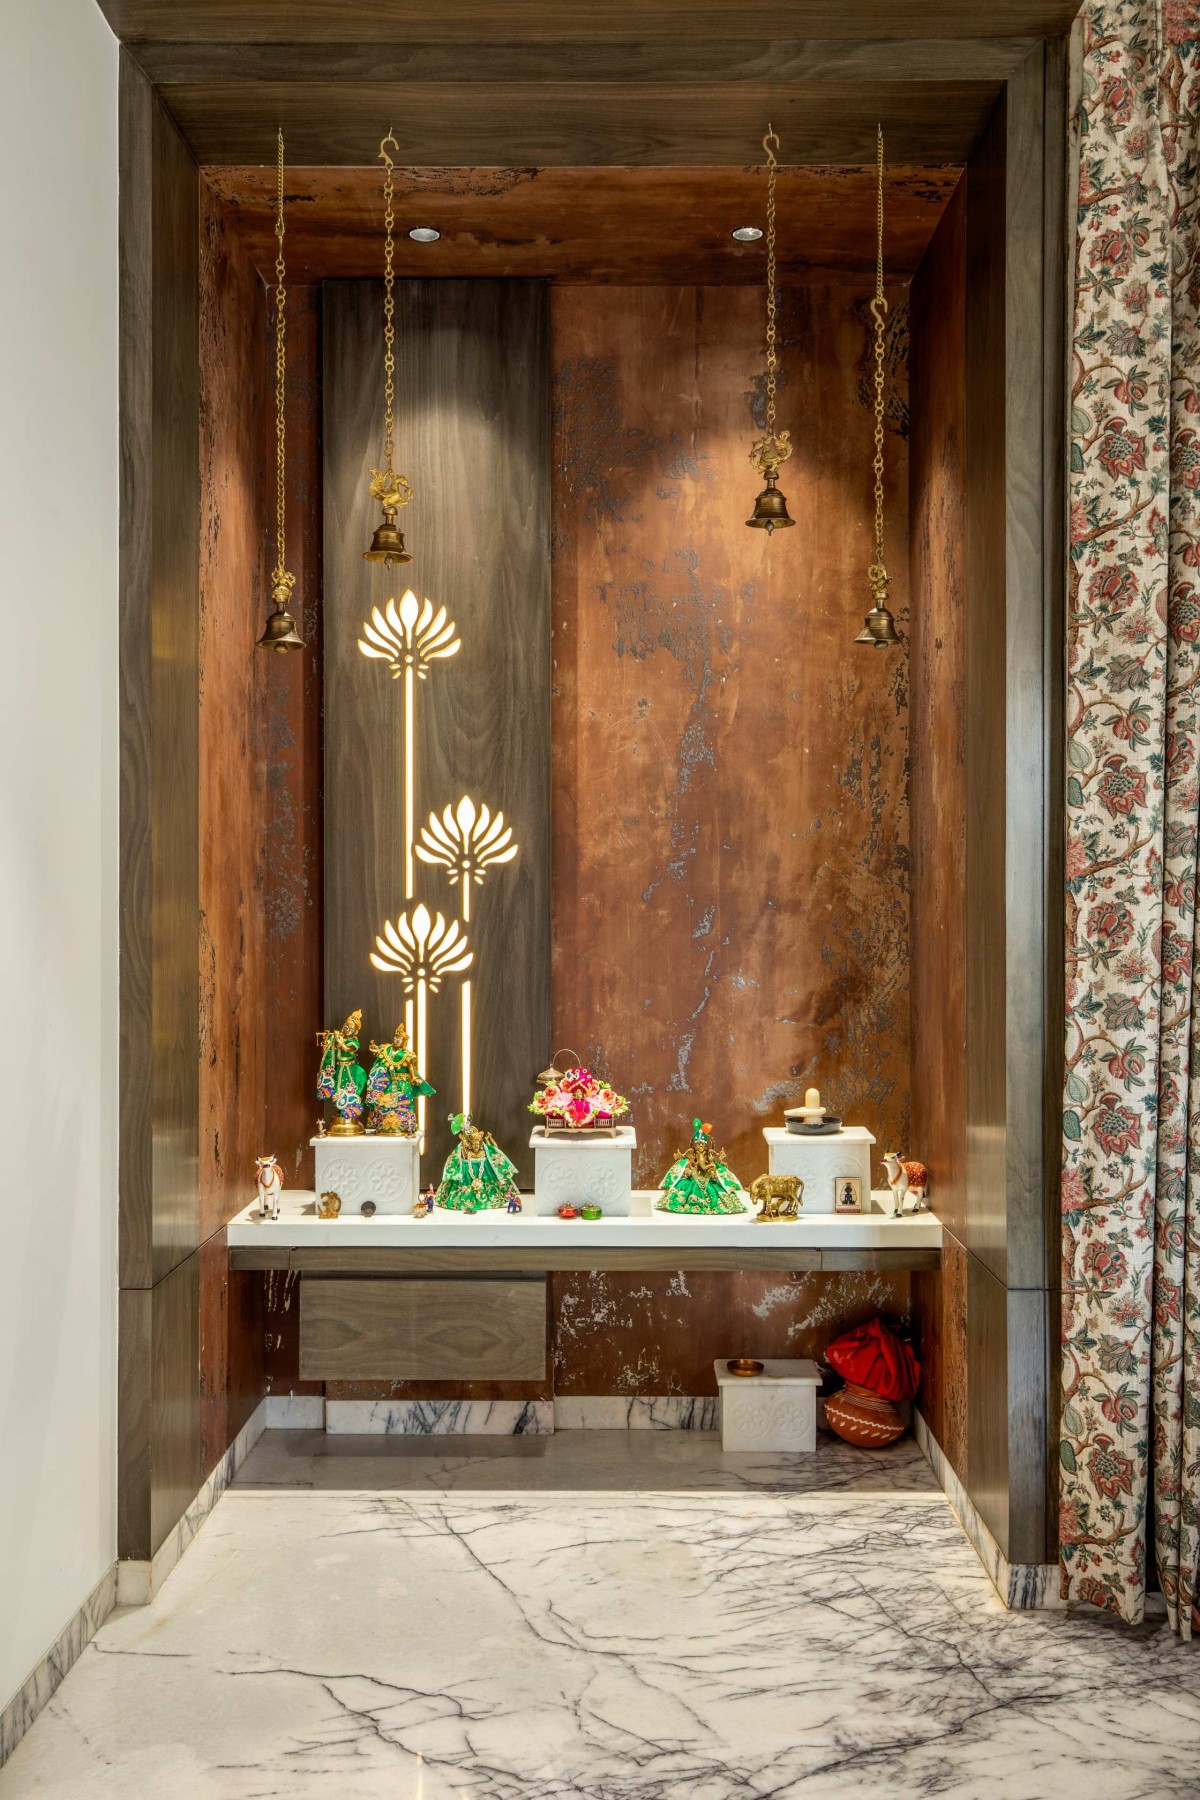 Pooja room of Trupti by Archipoint